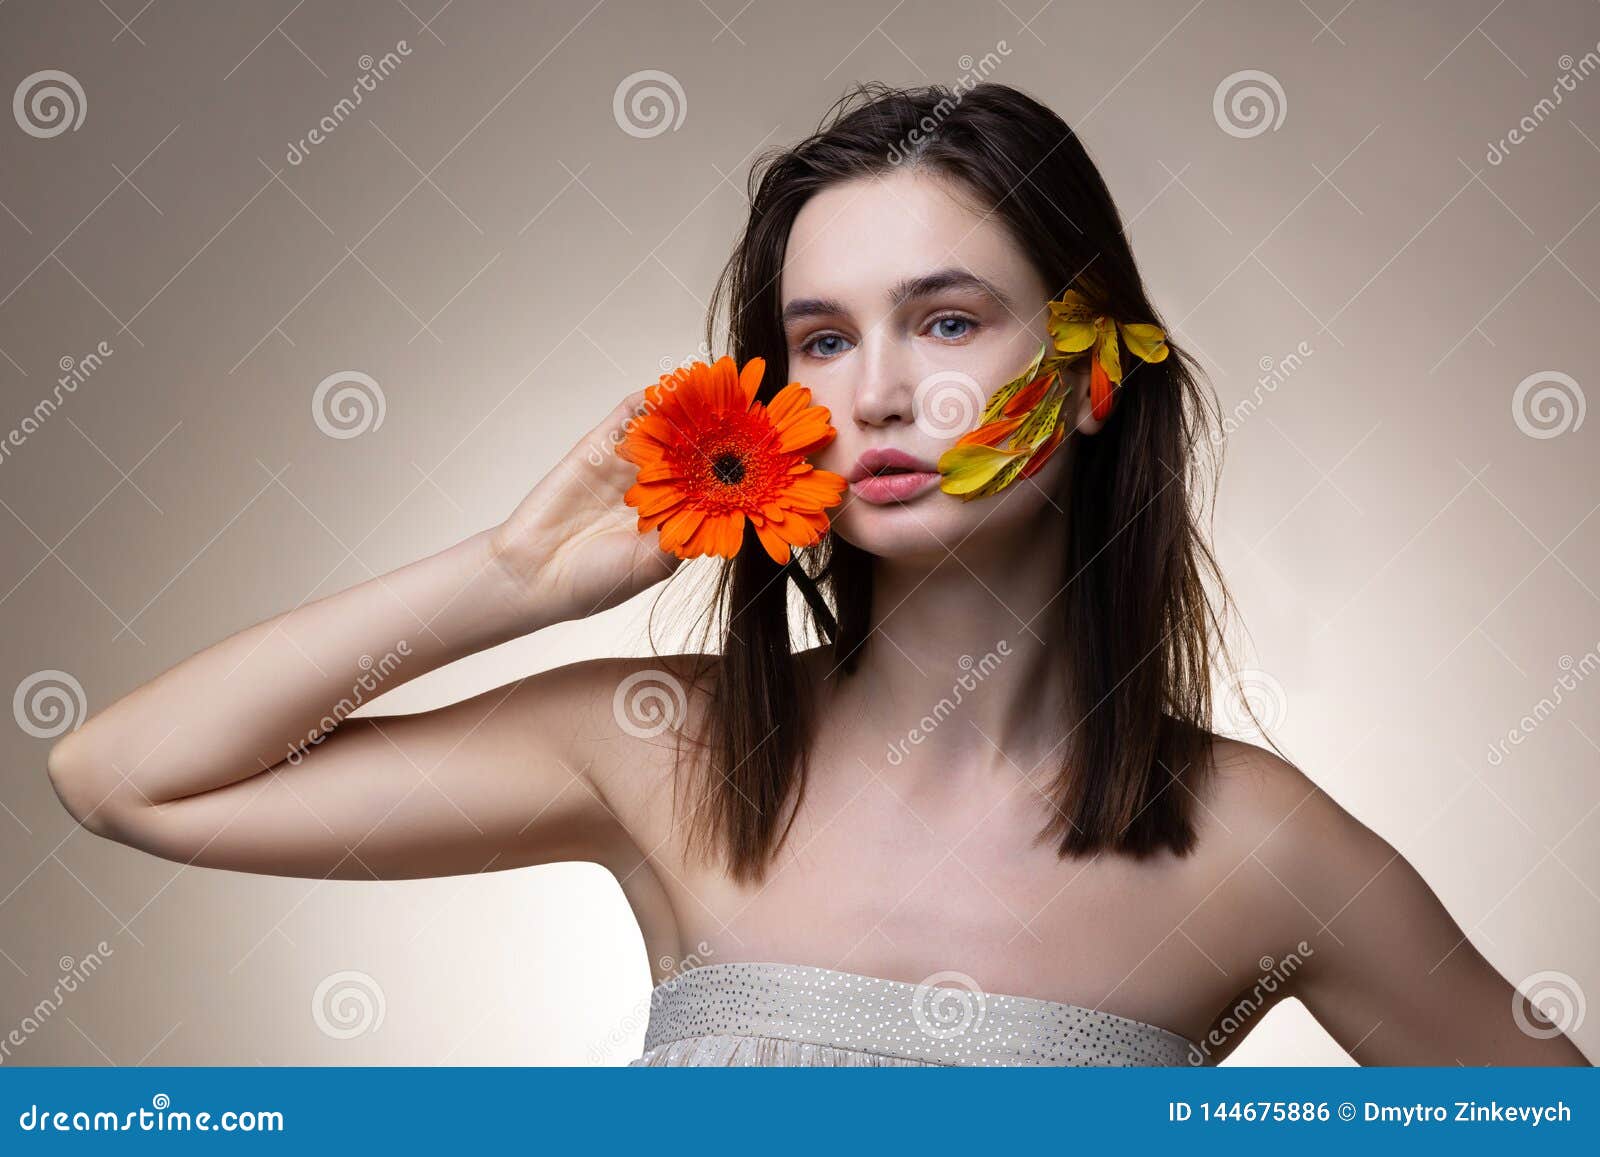 Young Woman Wearing Open Shoulder Dress Loving Flowers Stock Photo ...